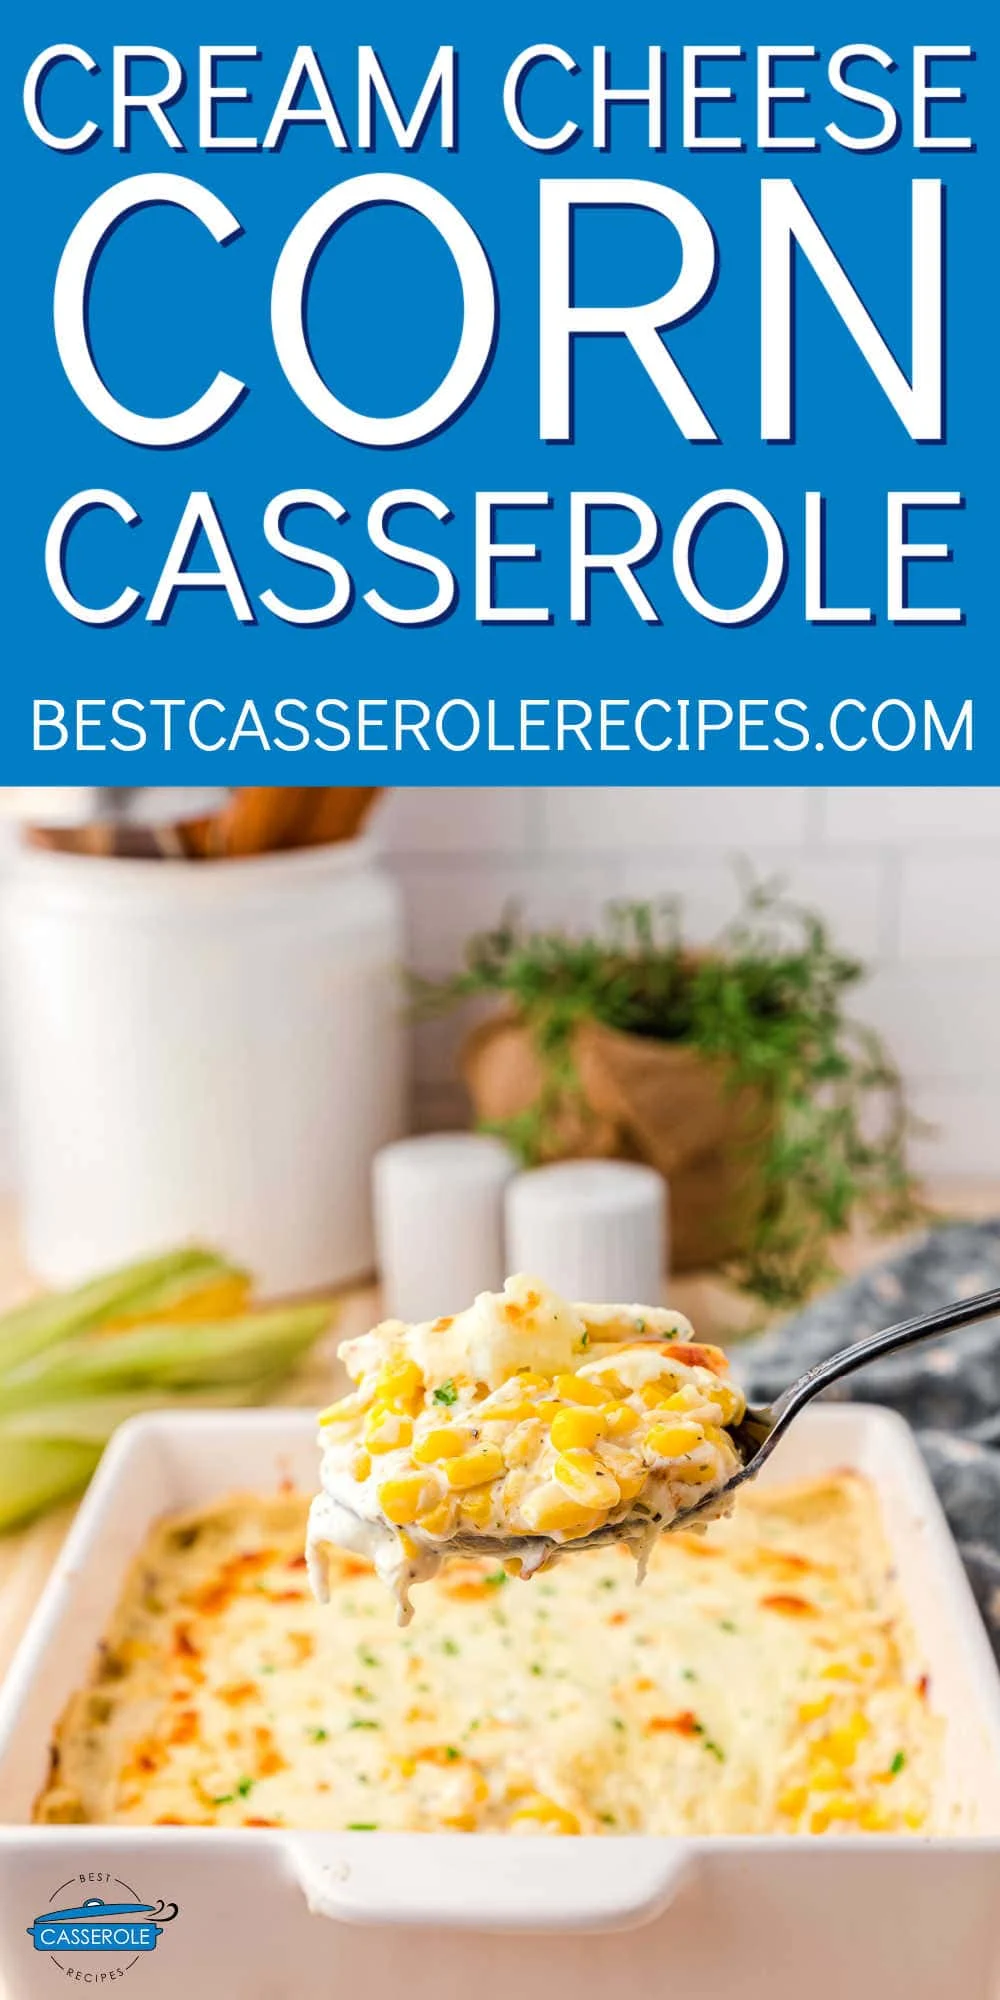 big spoon of corn casserole and blue banner with text